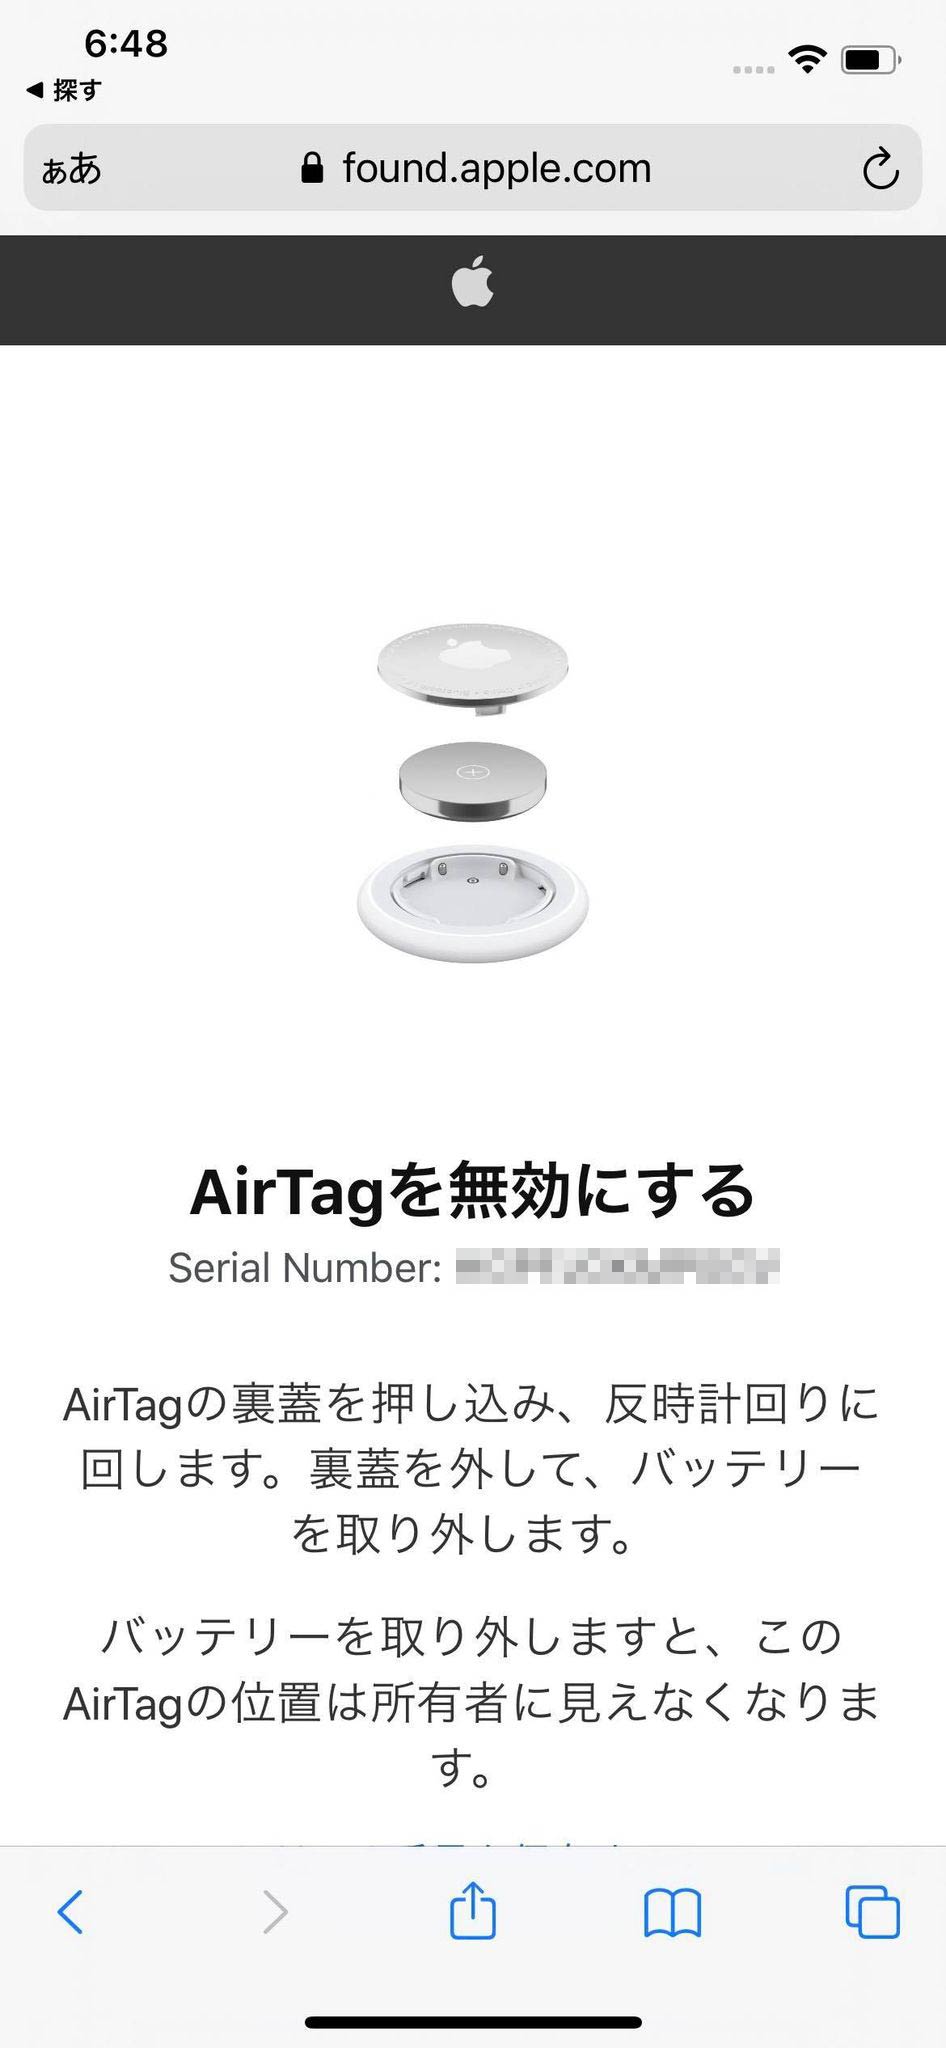 The Value Of Airtag That Appeared With Full Satisfaction Peace Of Mind And Solid Privacy Protection Tracked By 1 Billion Iphones Masaichi Honda Engadget Japan Version Newsdir3